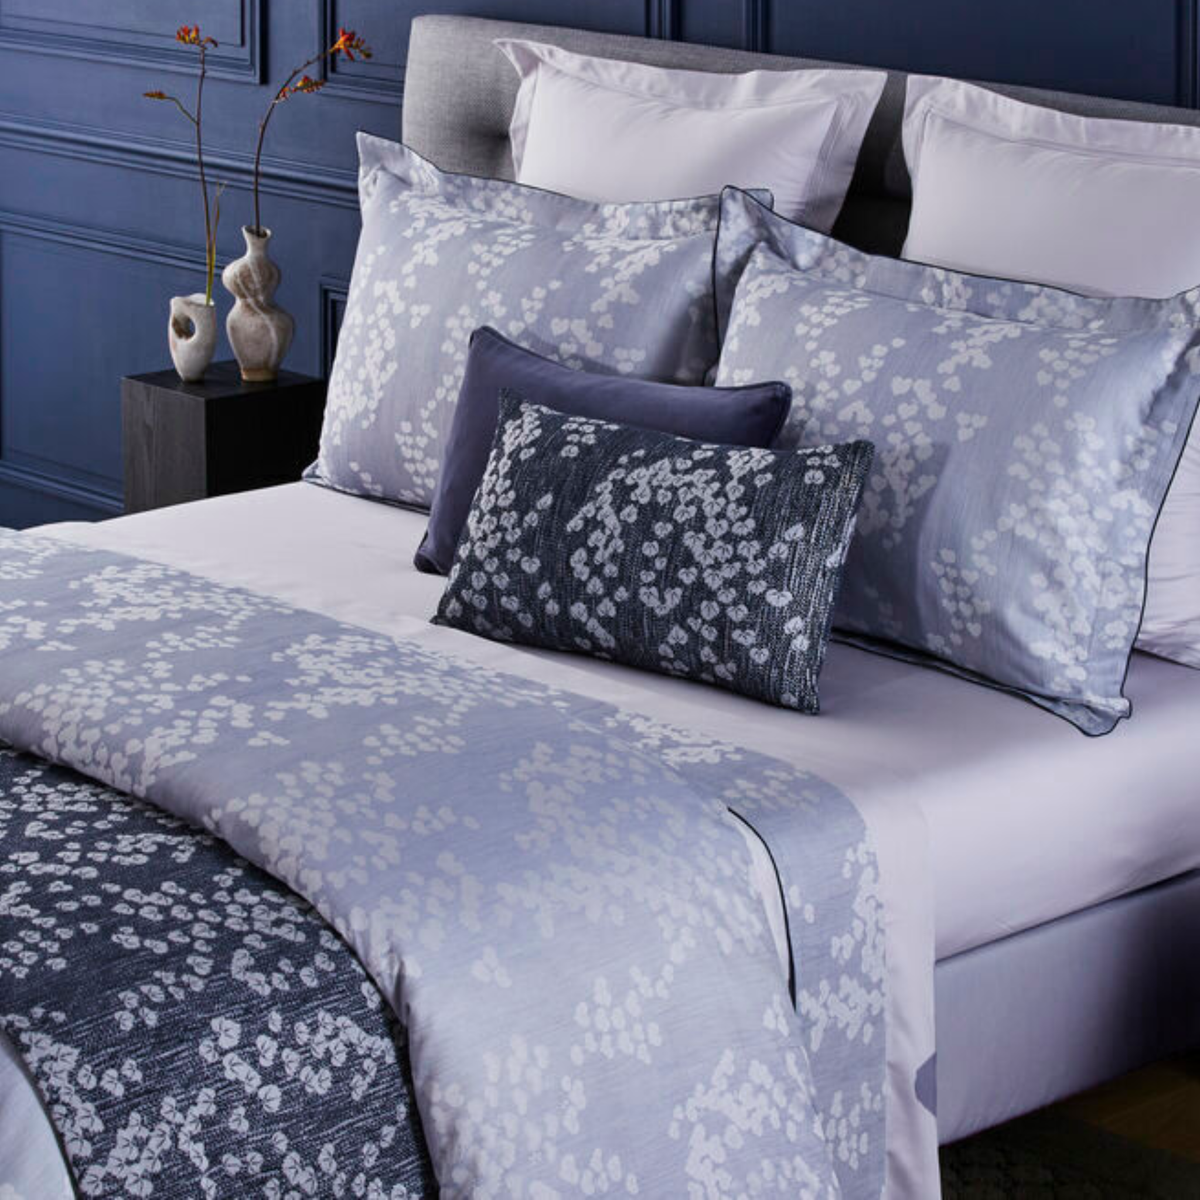 Closeup of Full Bed Dressed in Yves Delorme Estampe Bedding